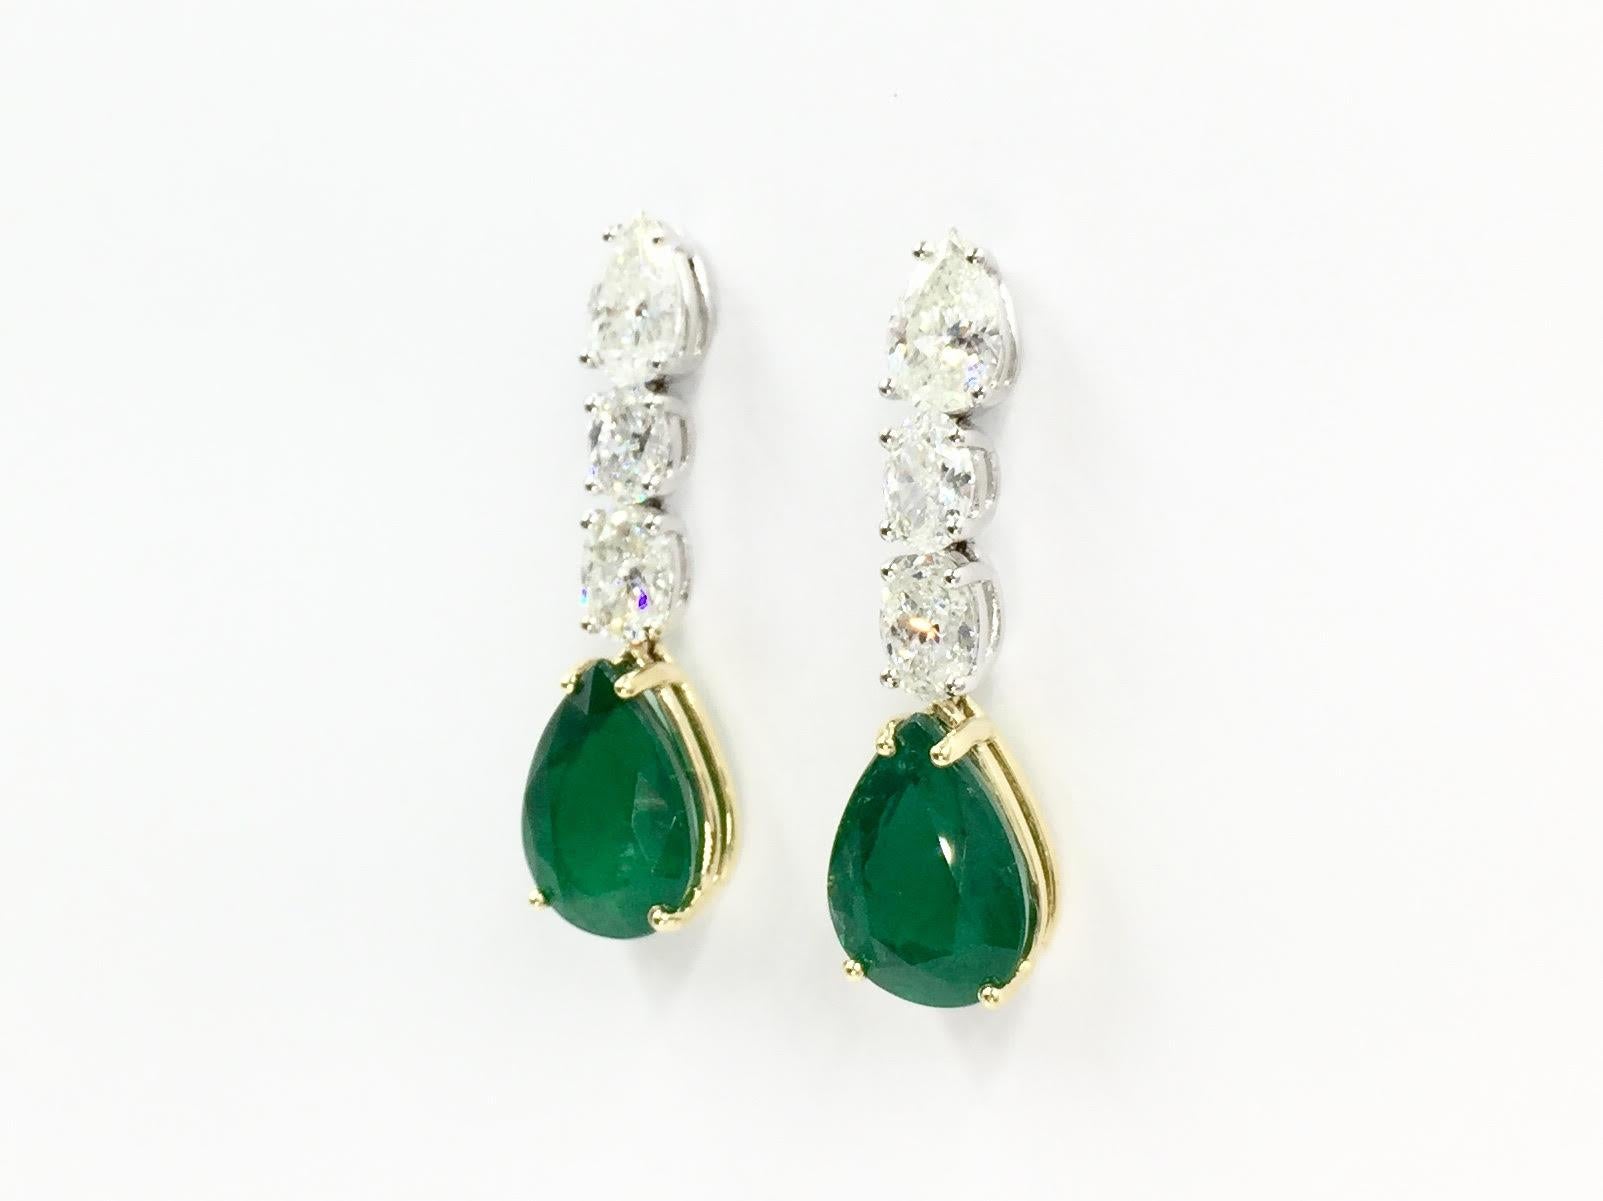 A stunning pair with gorgeous quality emeralds! The earrings have a total weight of 8.48 carats of pear shape emeralds that hang beautifully from three diamonds. Total weight of pear shape and oval brilliant diamonds is 3.43 carats, approximately